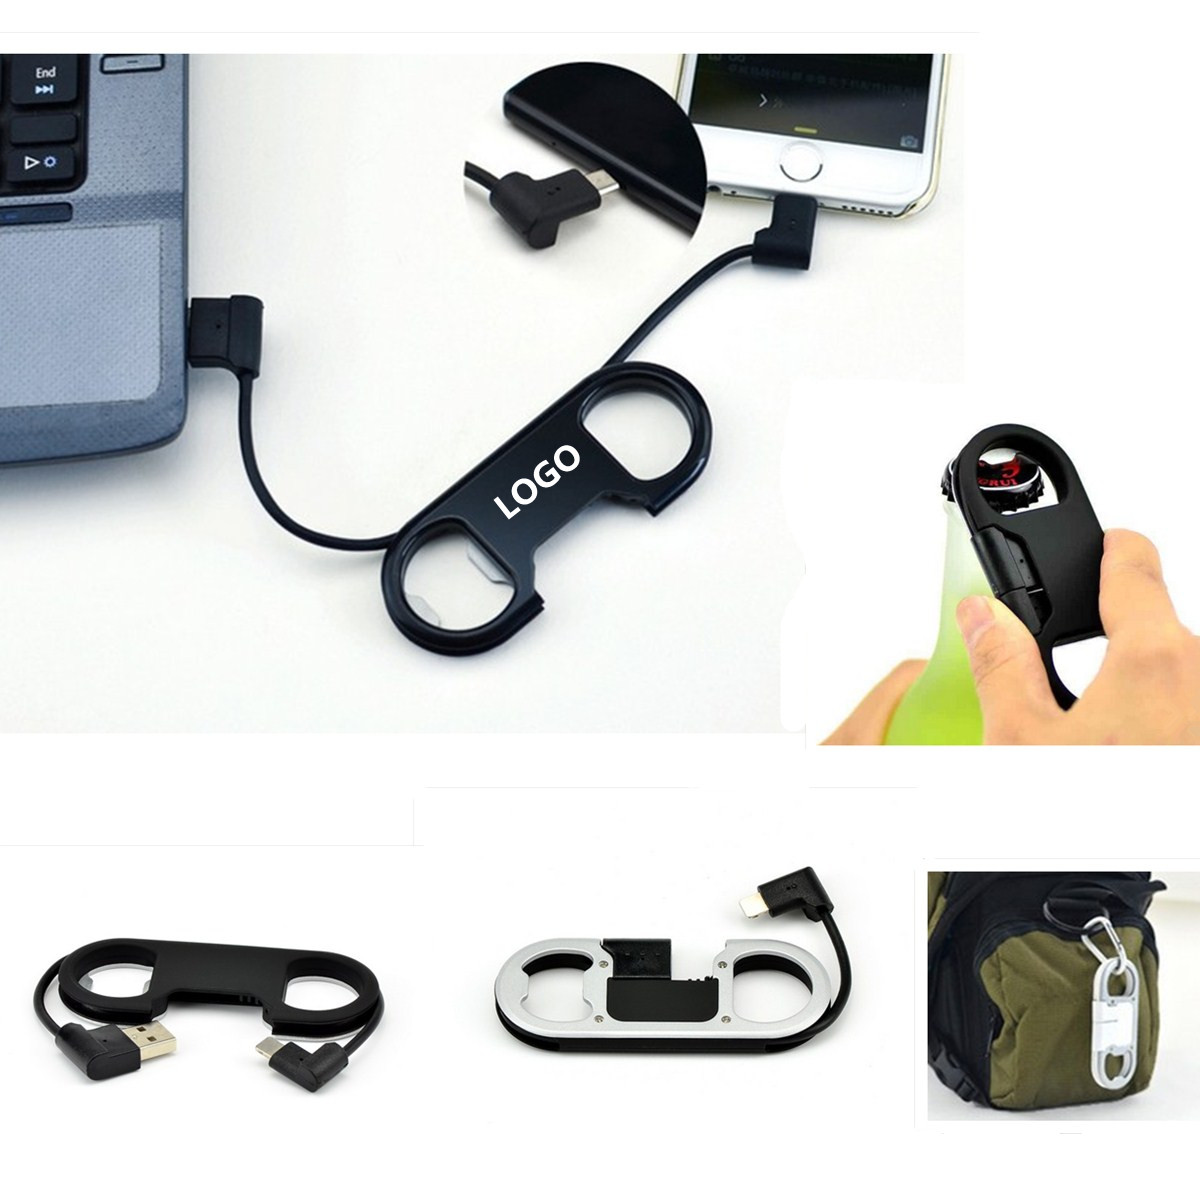 Android USB Charging Cable with Bottle Opener